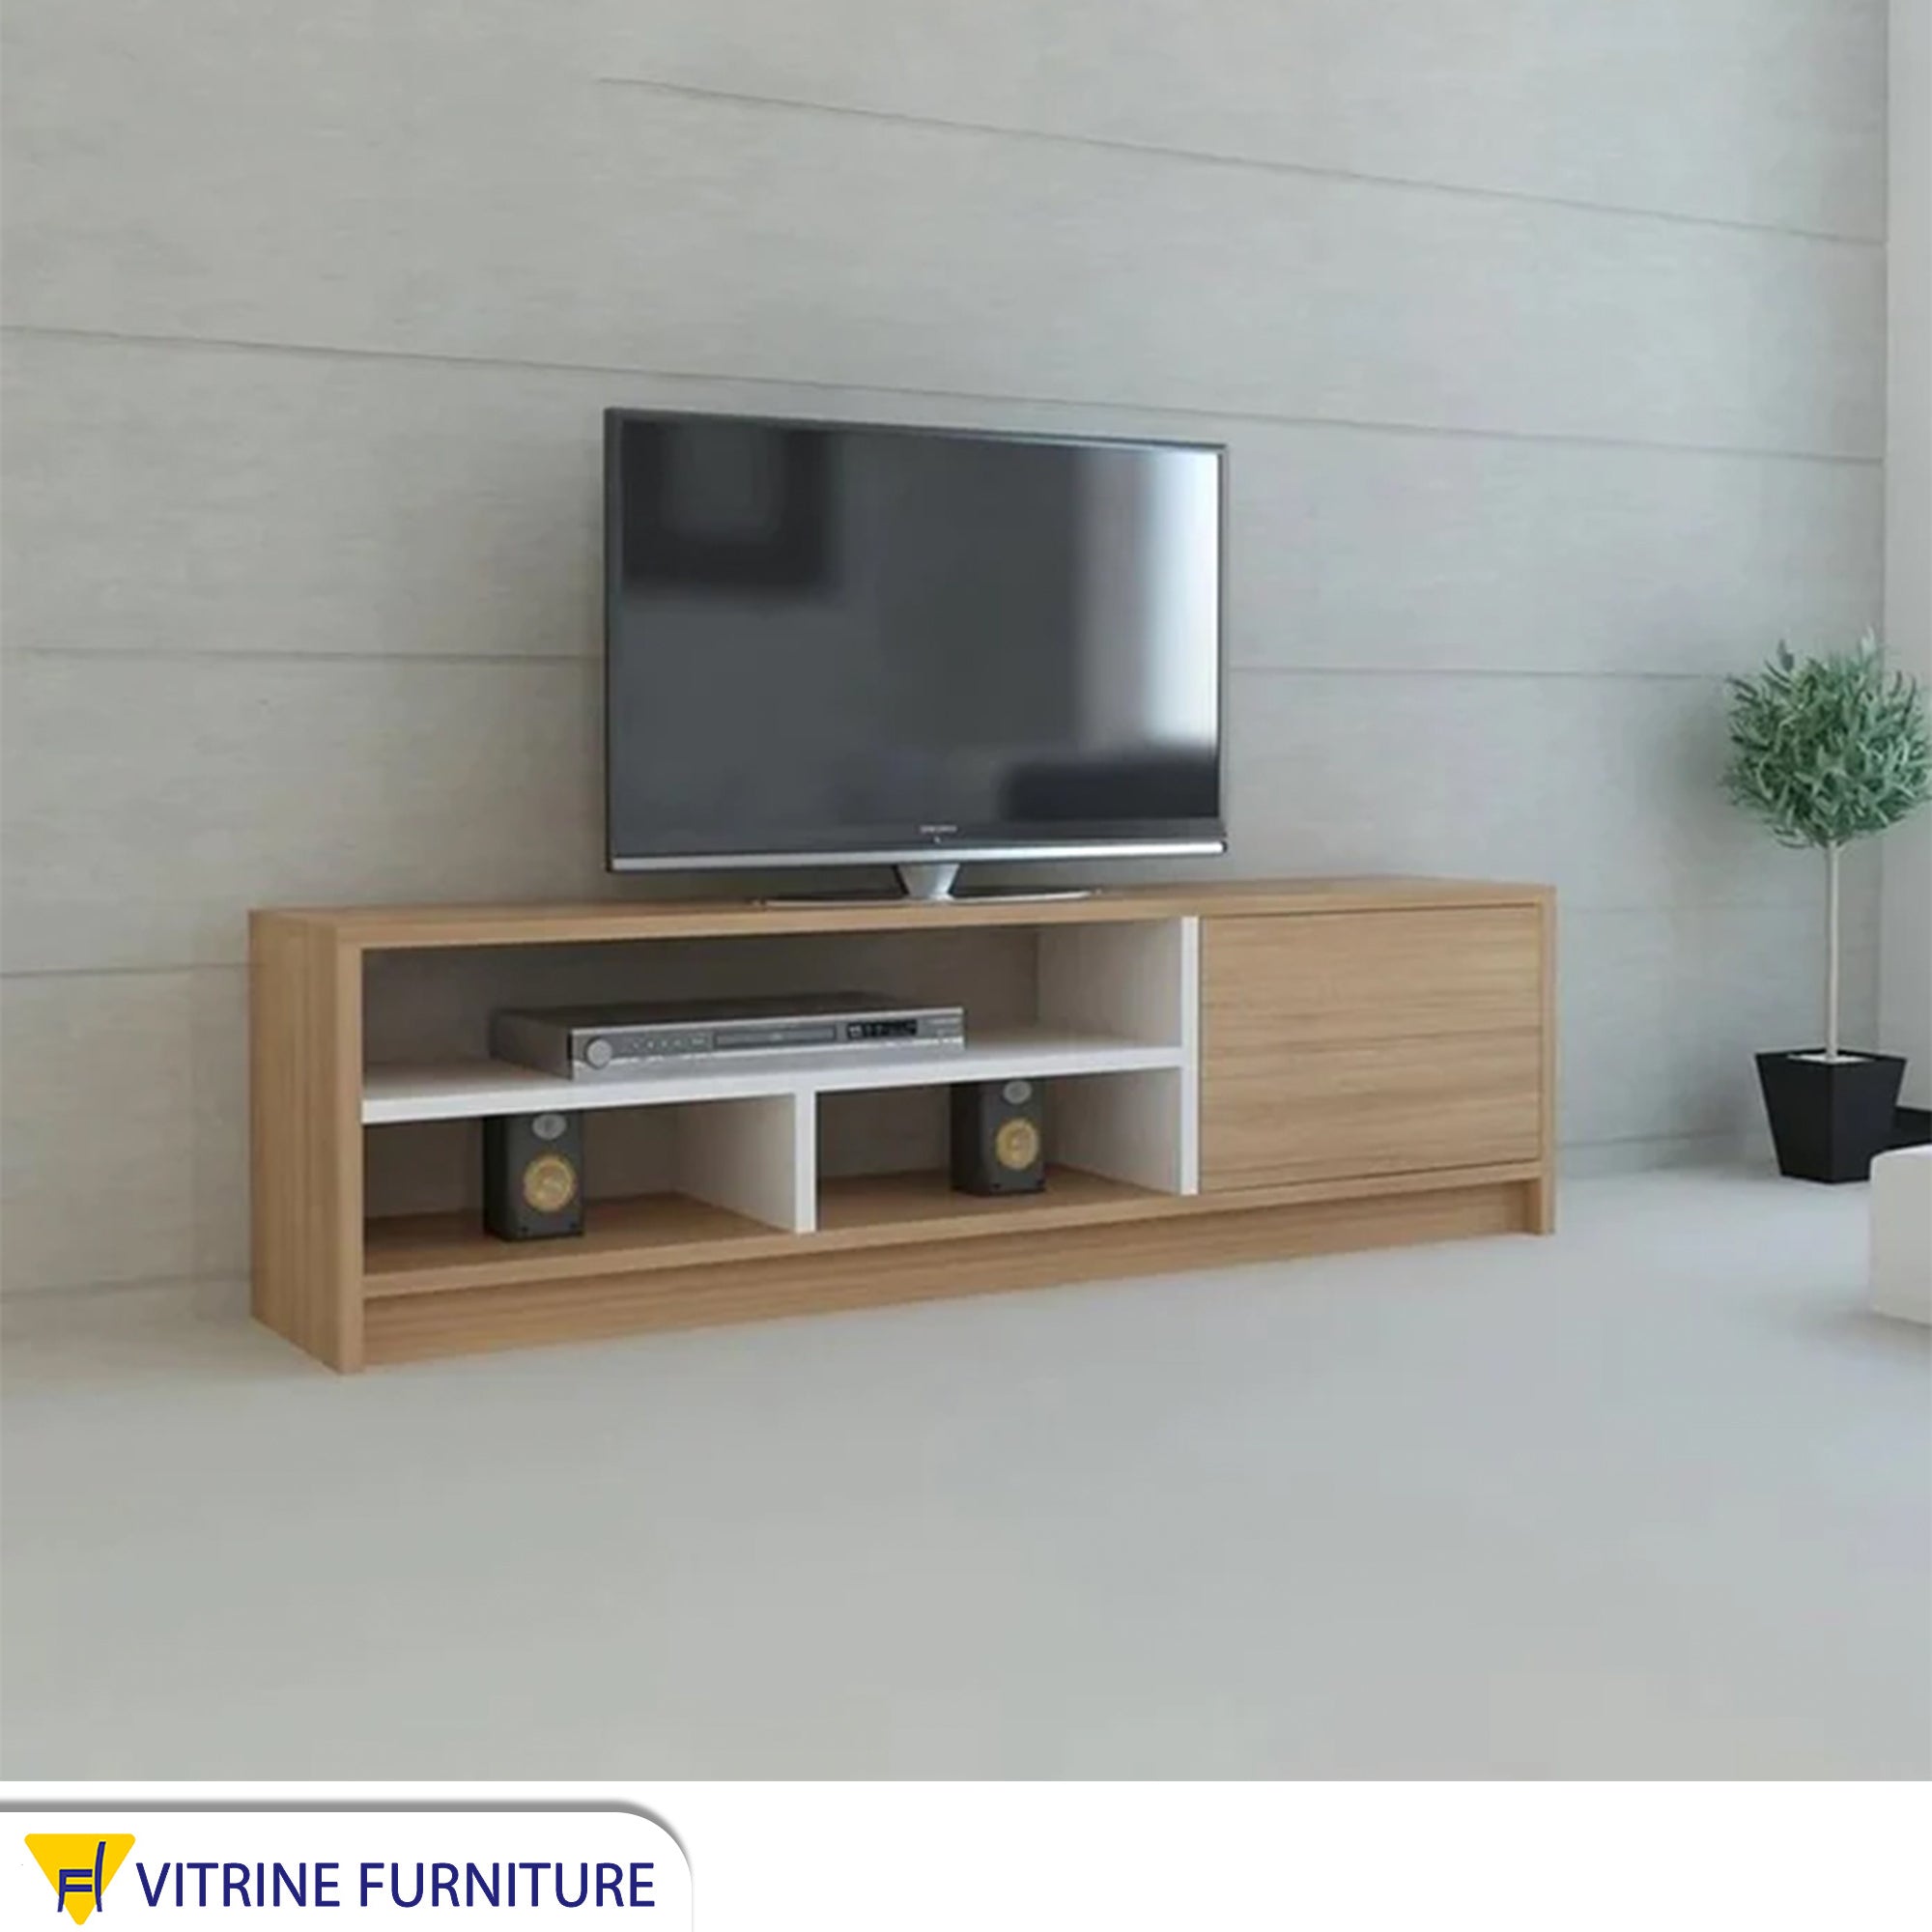 TV unit with two shelves divided from inside